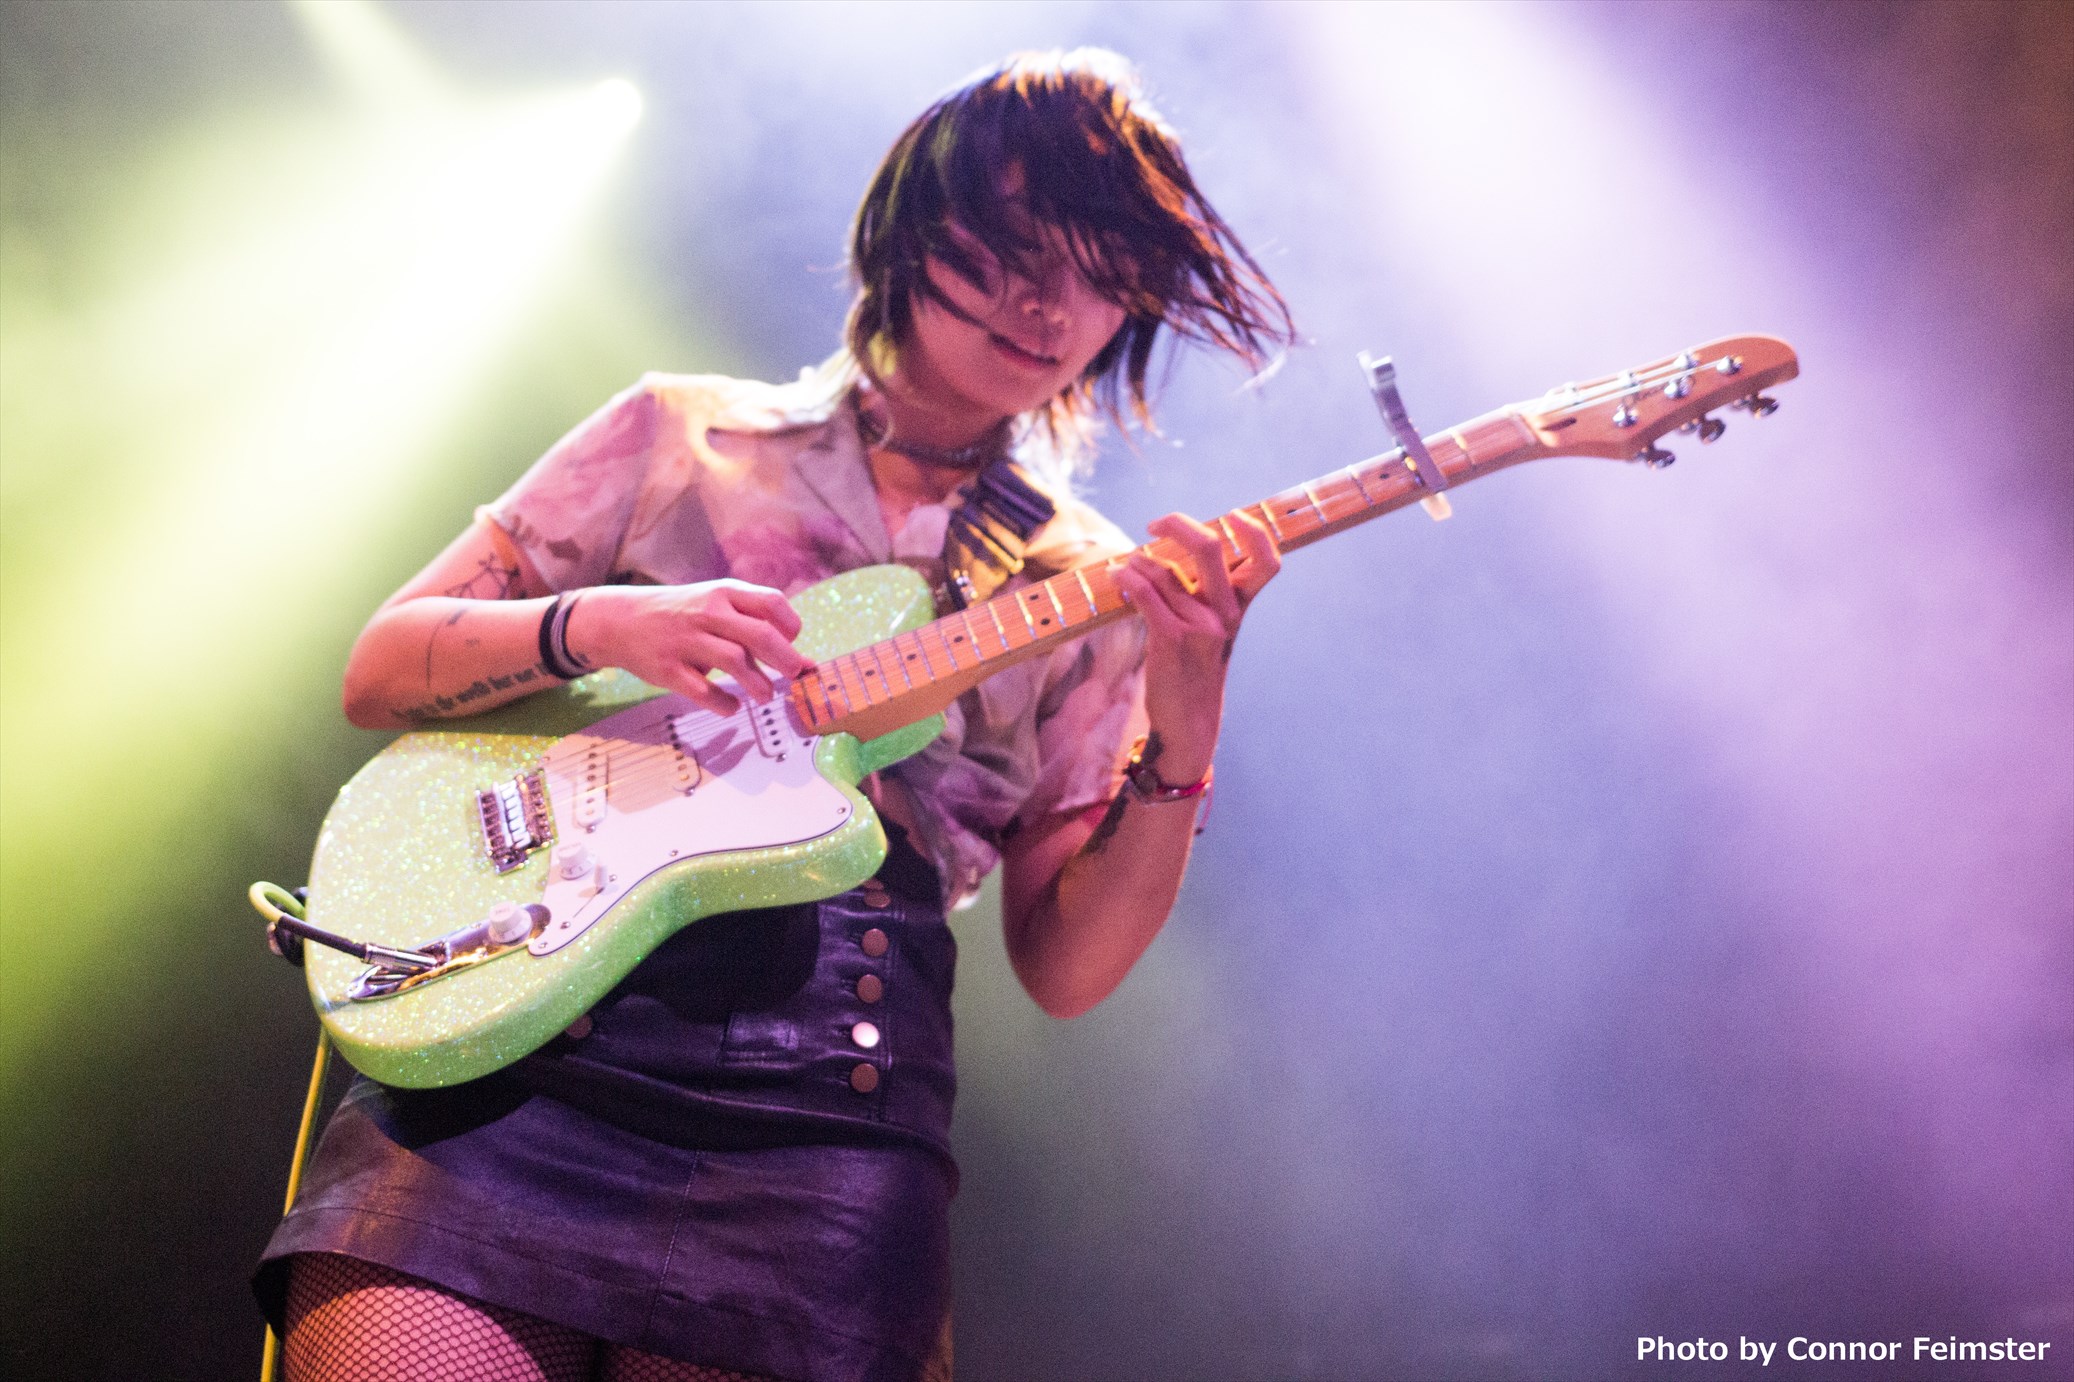 Yvette Young (Covet) Signature Model “YY10” | NEWS | Ibanez ...